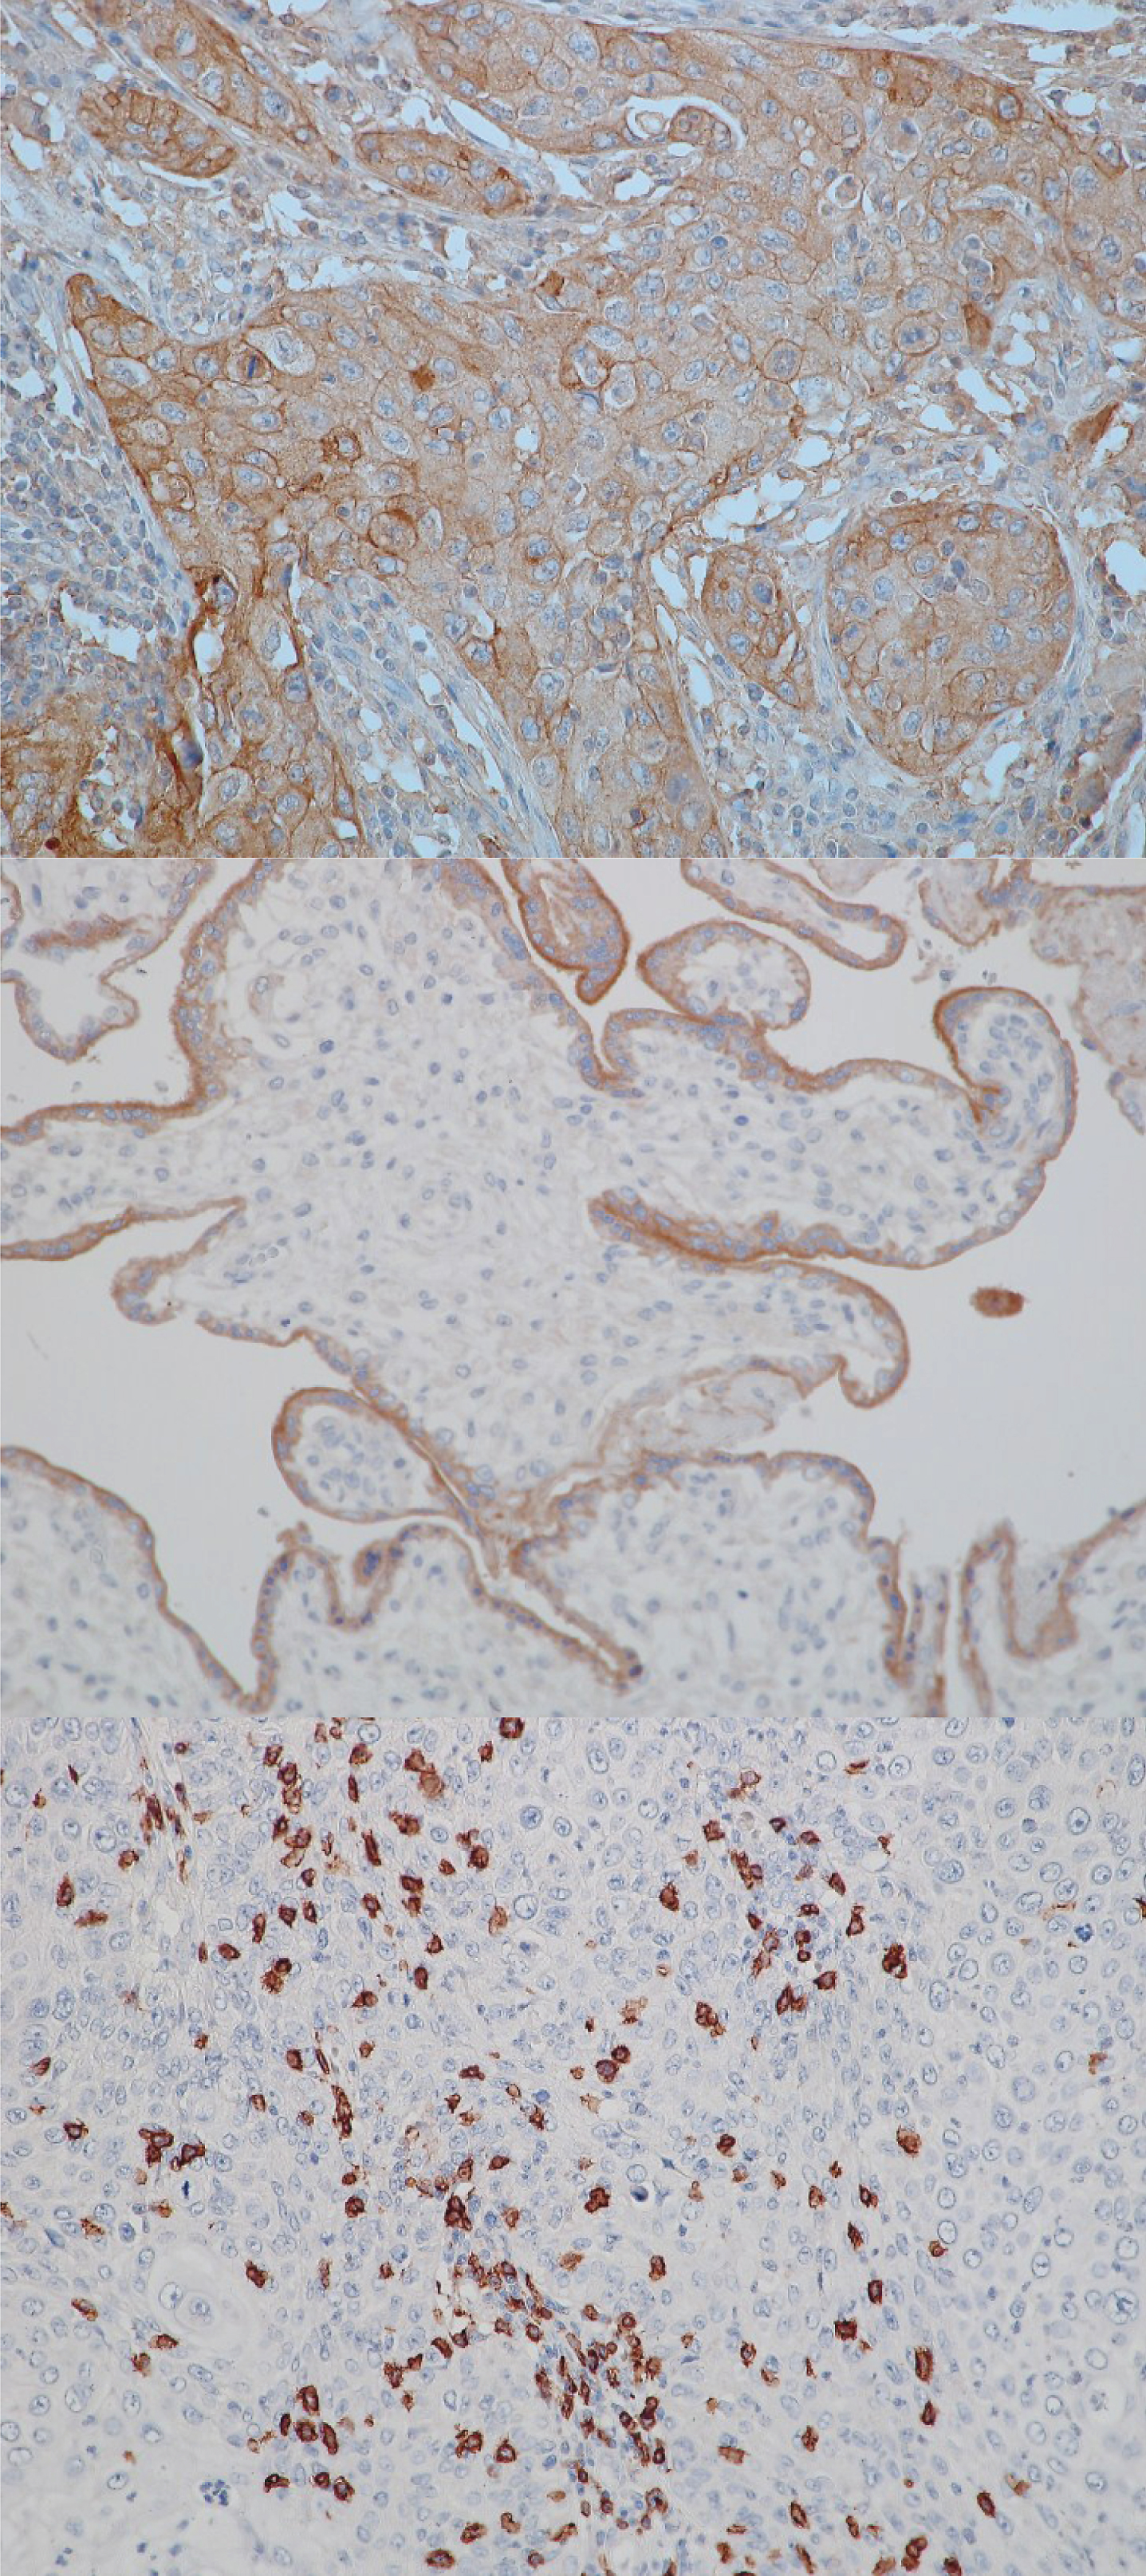 Exemplary stains for PD-L1 and CD8. From top to bottom: PD-L1 positive tumor, 20x; positive control (human placenta) for PD-L1, 20x; CD8 infiltration, 20x.